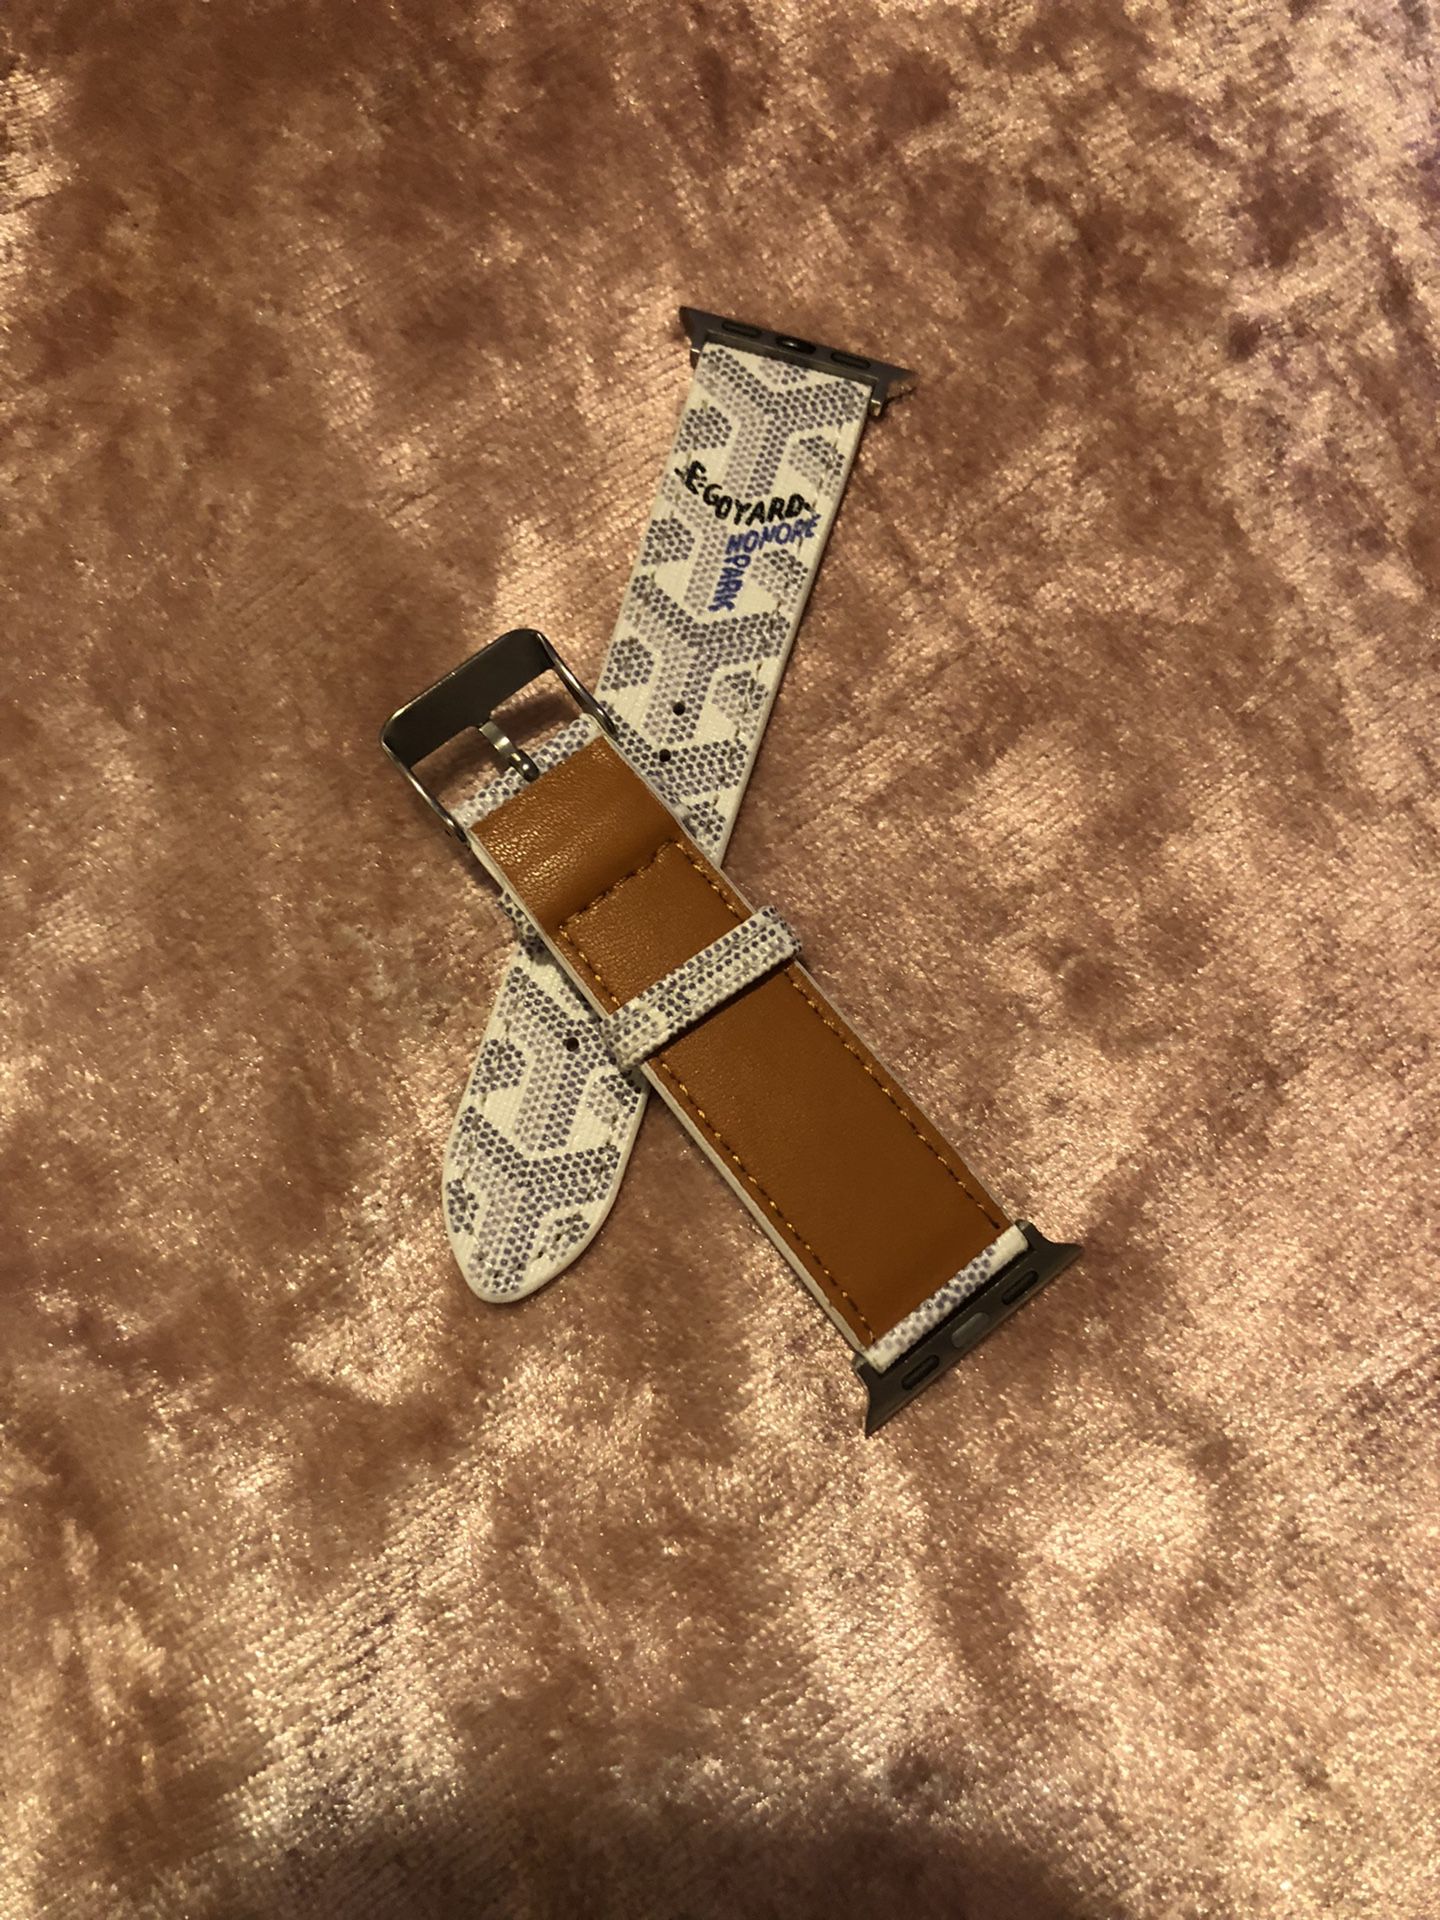 Apple watch band – Patches Of Upcycling